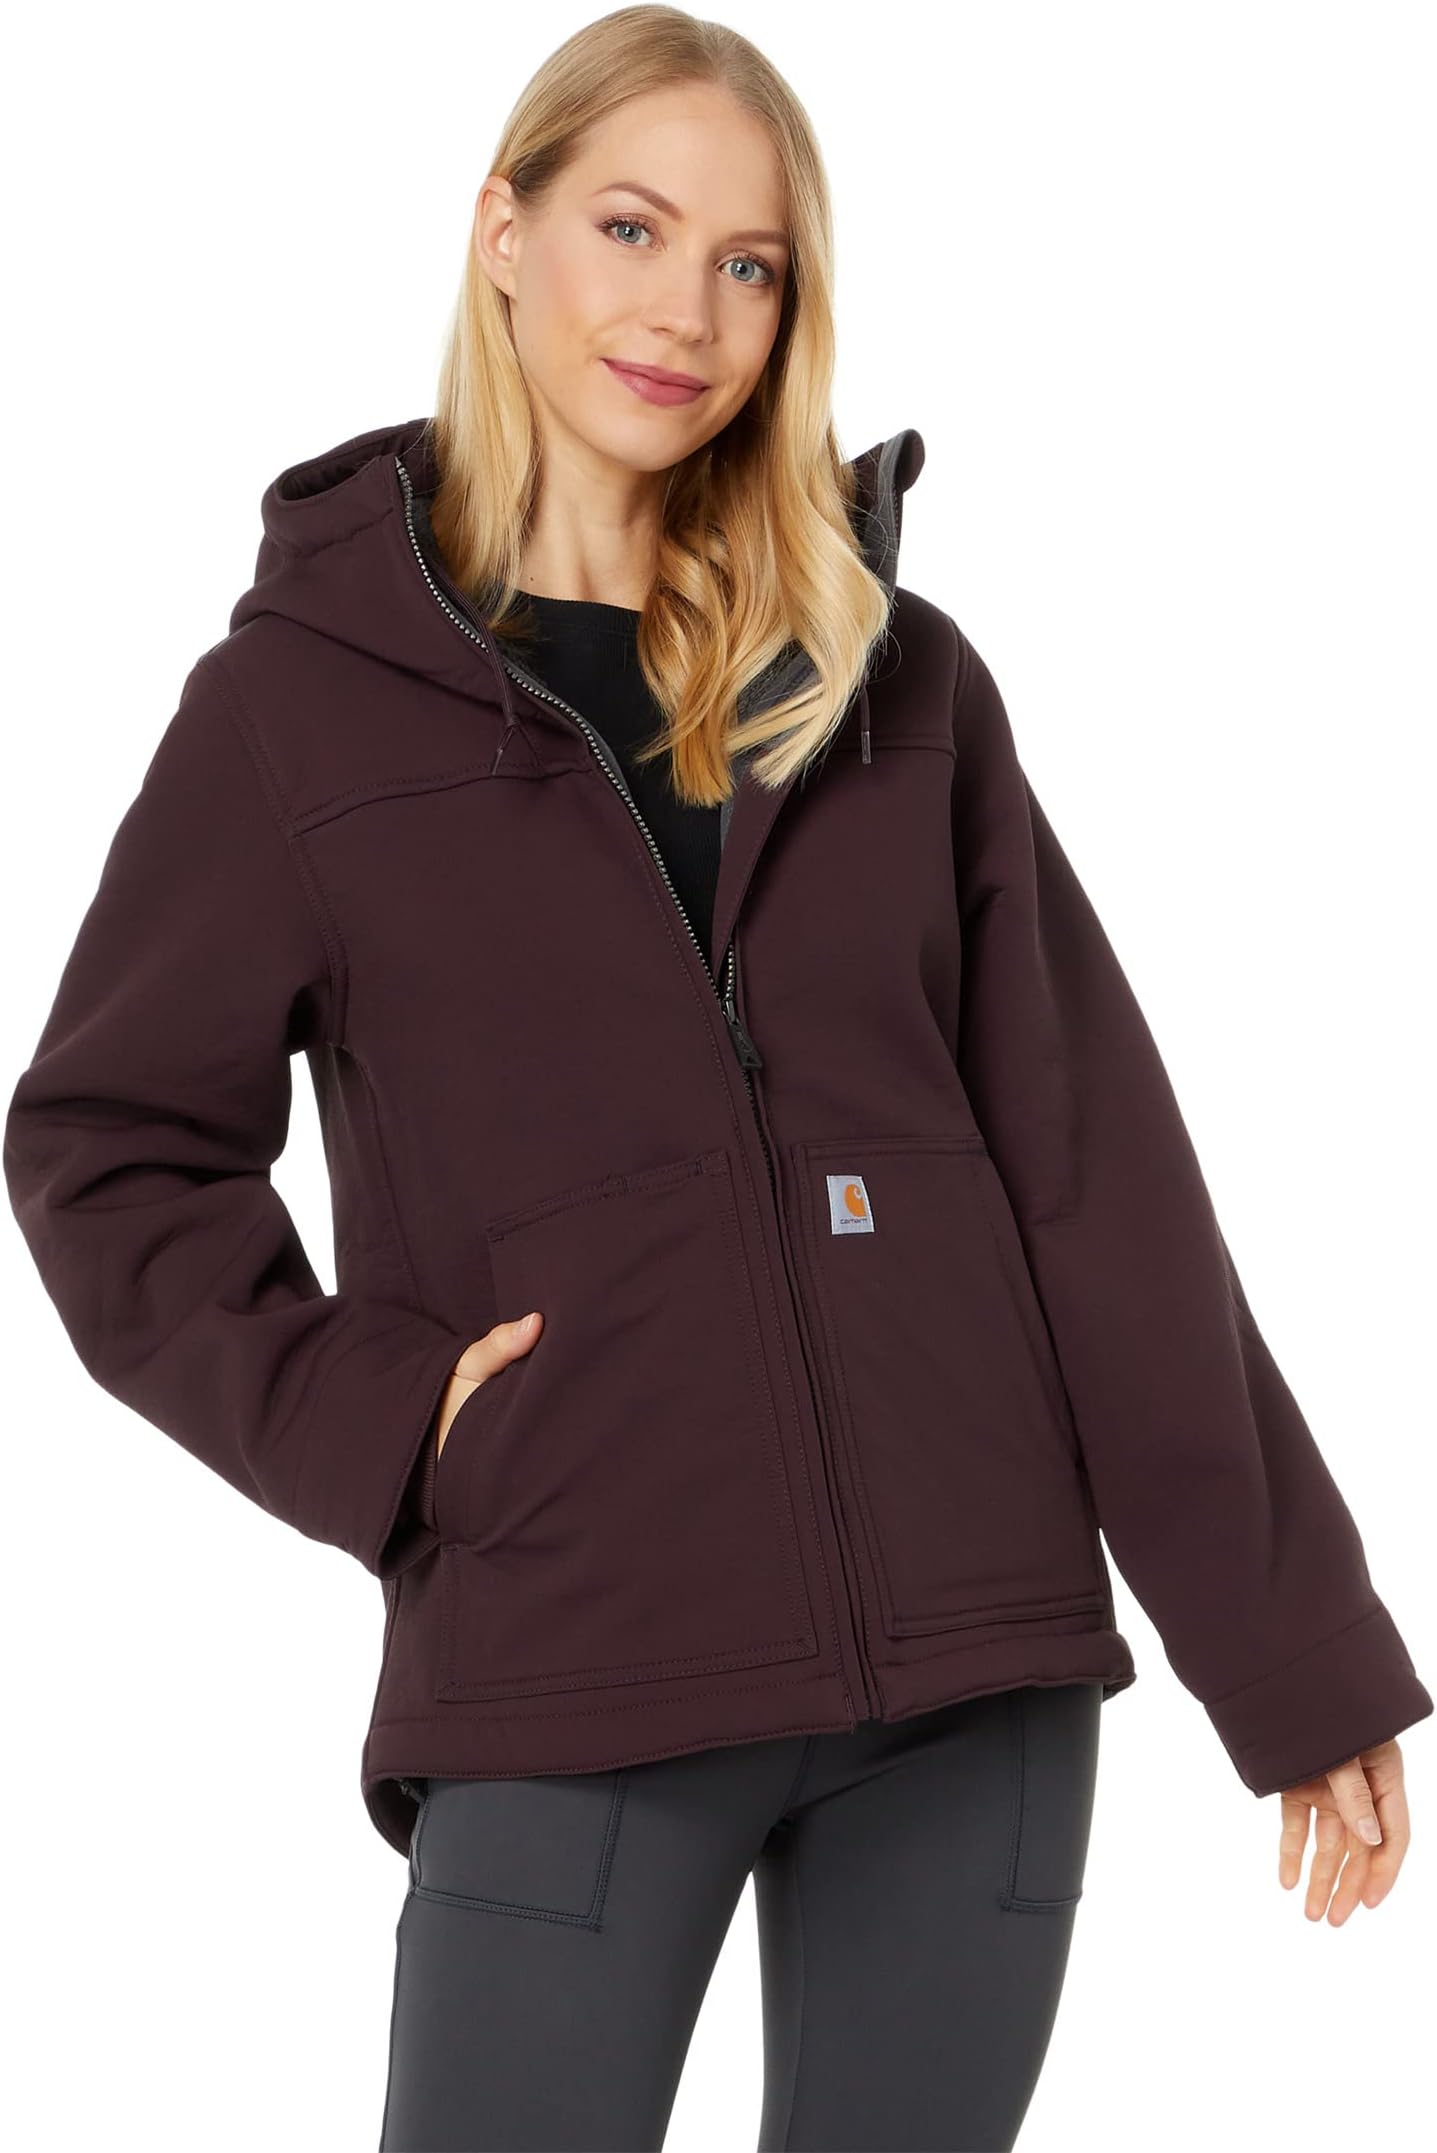 Куртка Super Dux Relaxed Fit Sherpa Lined Jacket Carhartt, цвет Blackberry